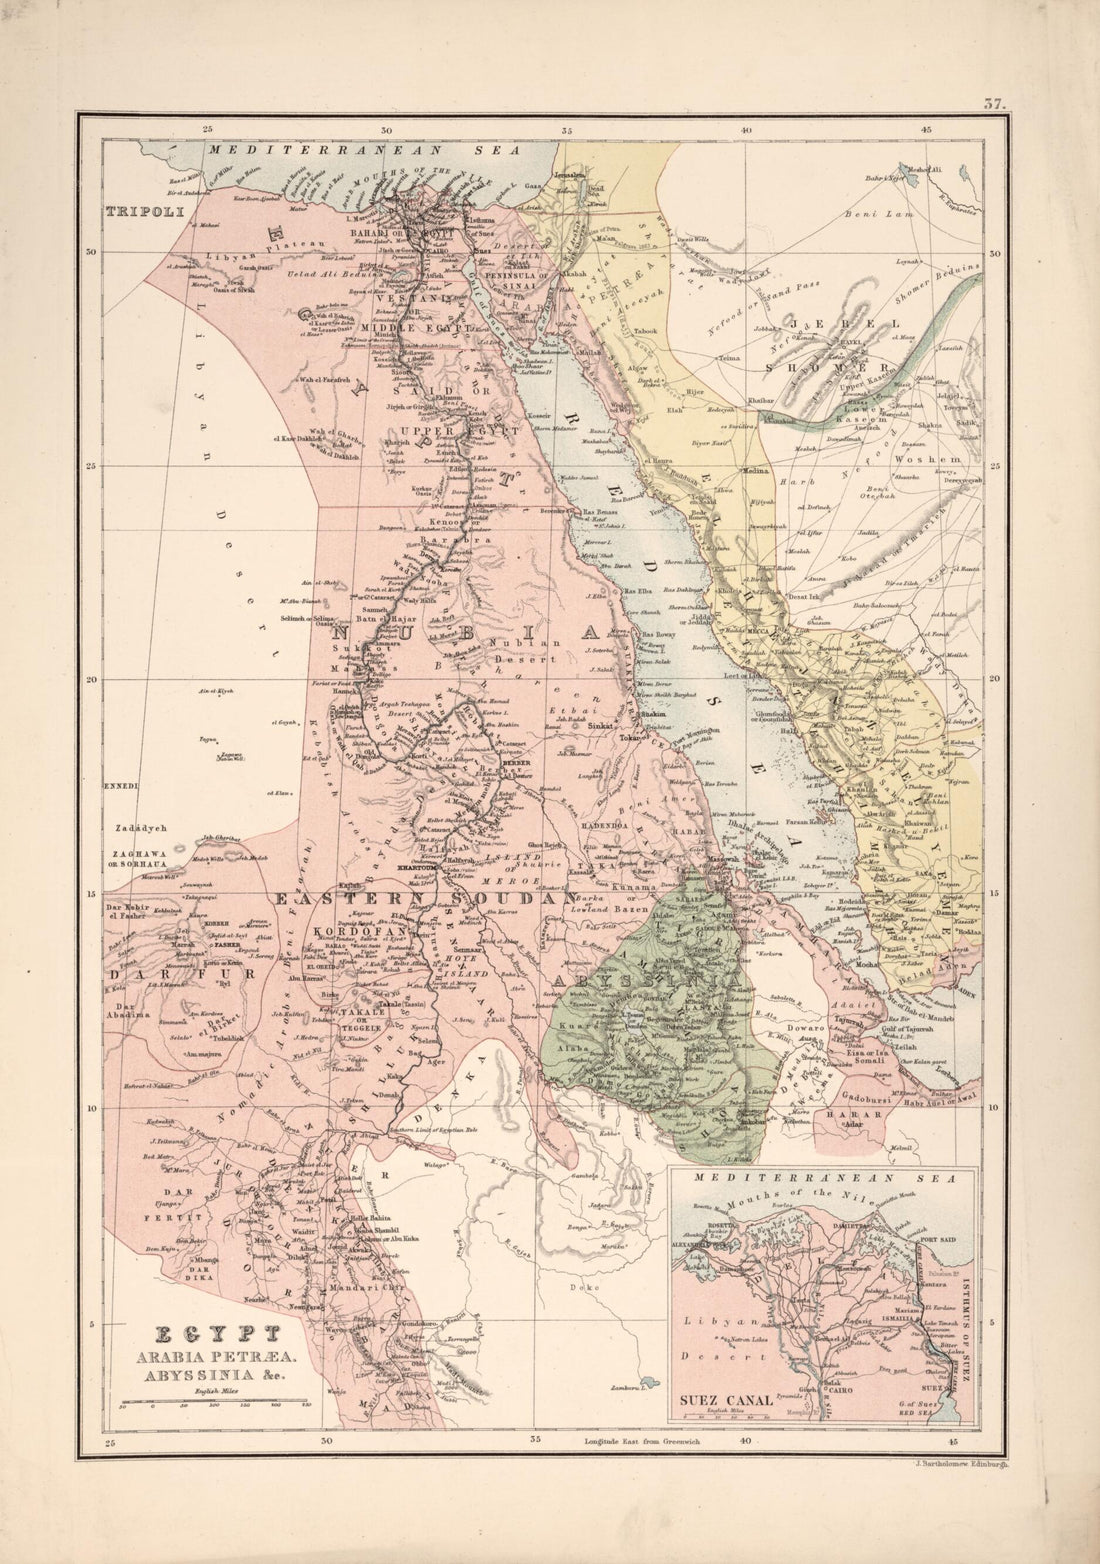 This old map of Egypt, Arabia Petræa, Abyssinia, &amp;c from 1885 was created by J. G. (John George) Bartholomew in 1885